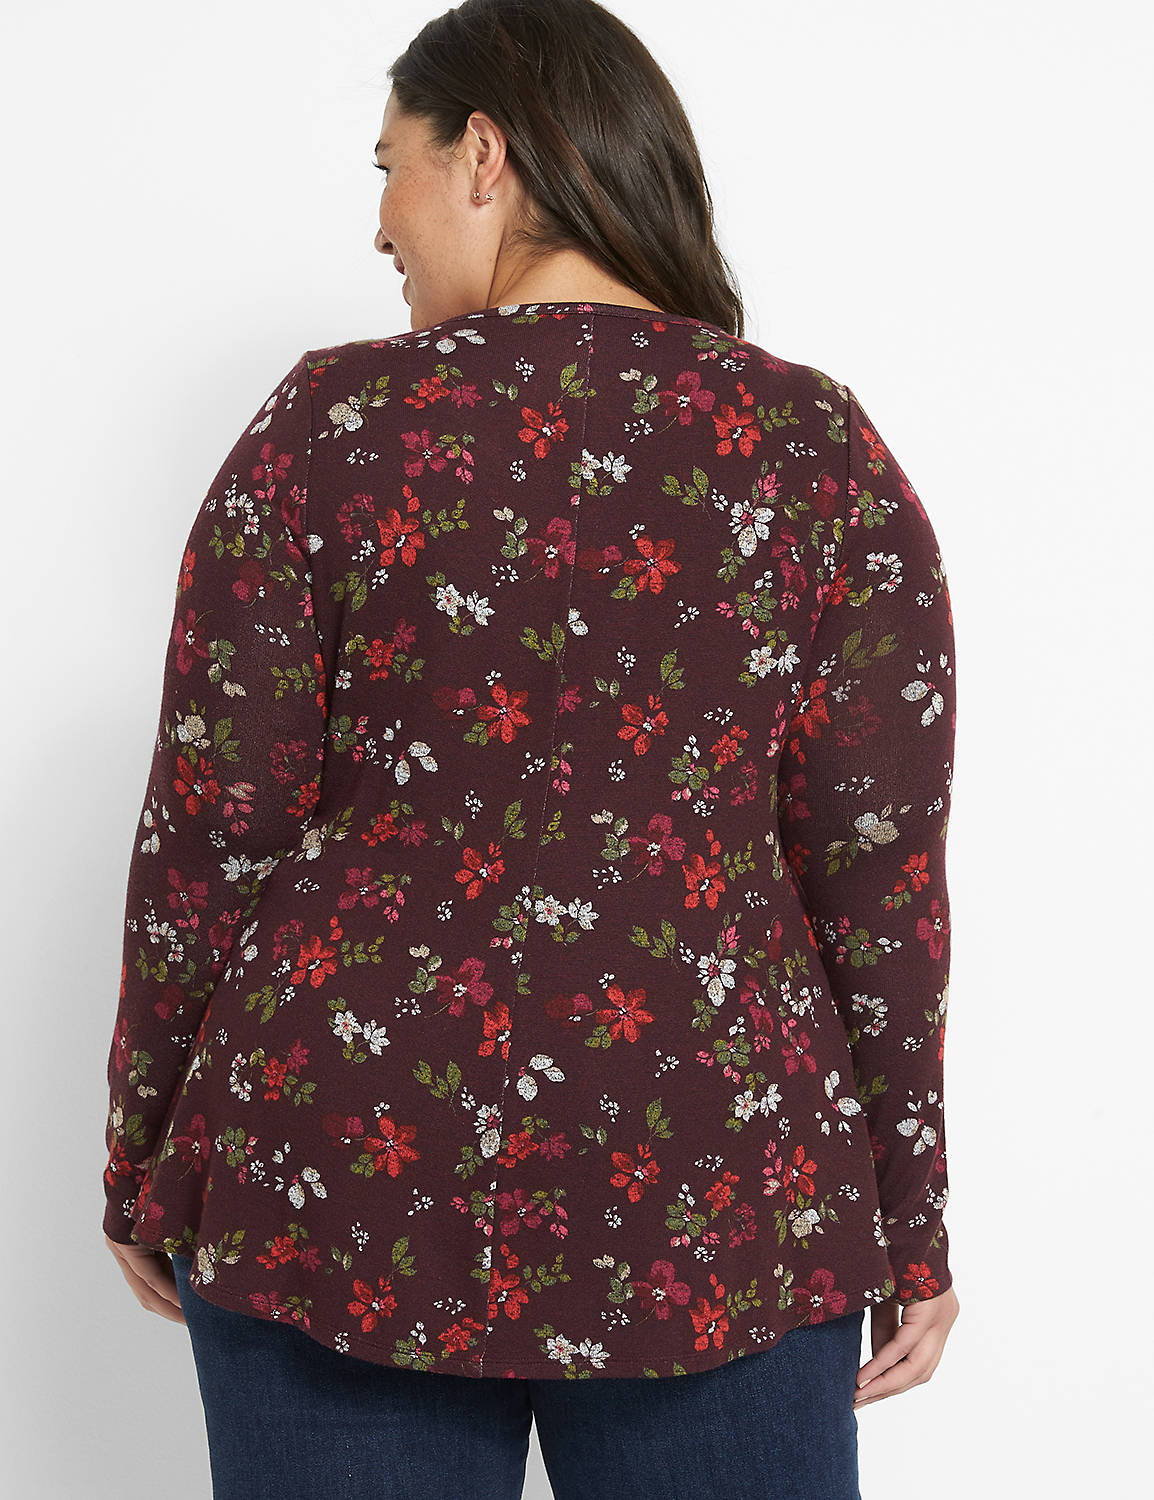 Long Sleeve Scoop Neck Fit and Flare Hacci Top 1123721:LBH21091_AaliyahFloral_V1_CW14:10/12 Product Image 2